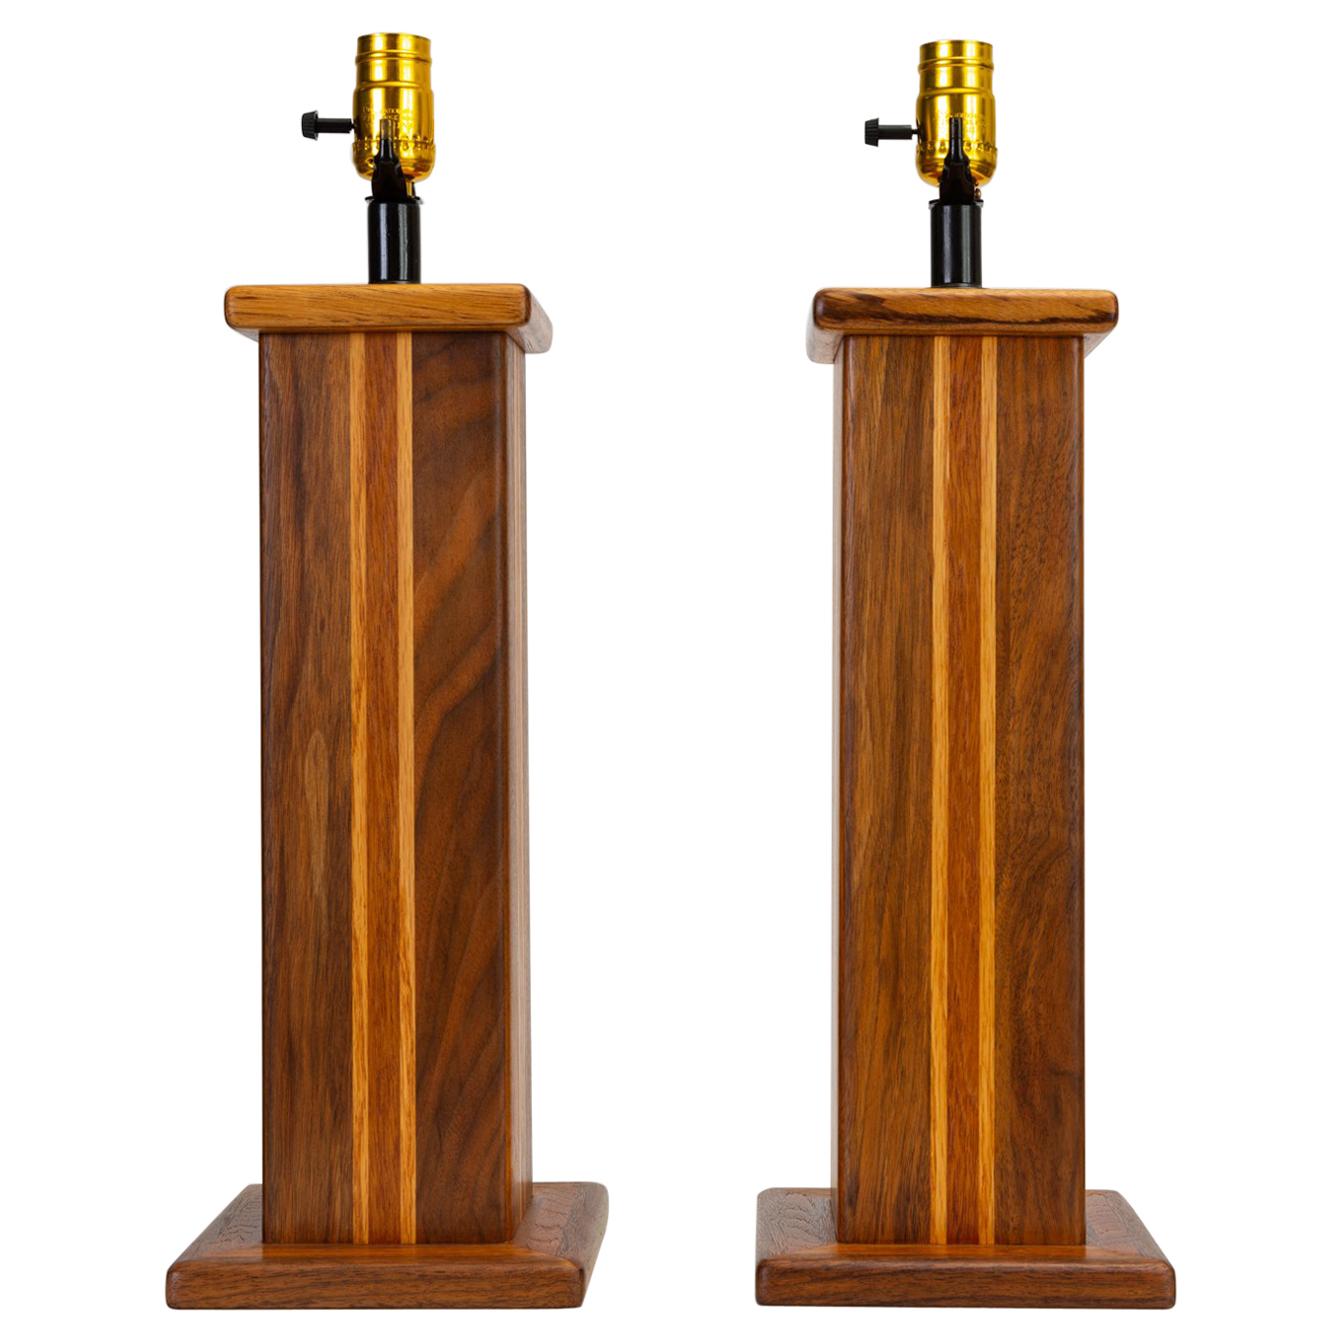 A pair of American handcrafted wooden pedestal lamps, having a columnar body in solid walnut, inlaid with oak and African mahogany, capped by a square base of walnut and mahogany and a capital in nicely figured zebrawood.  A small portion of the